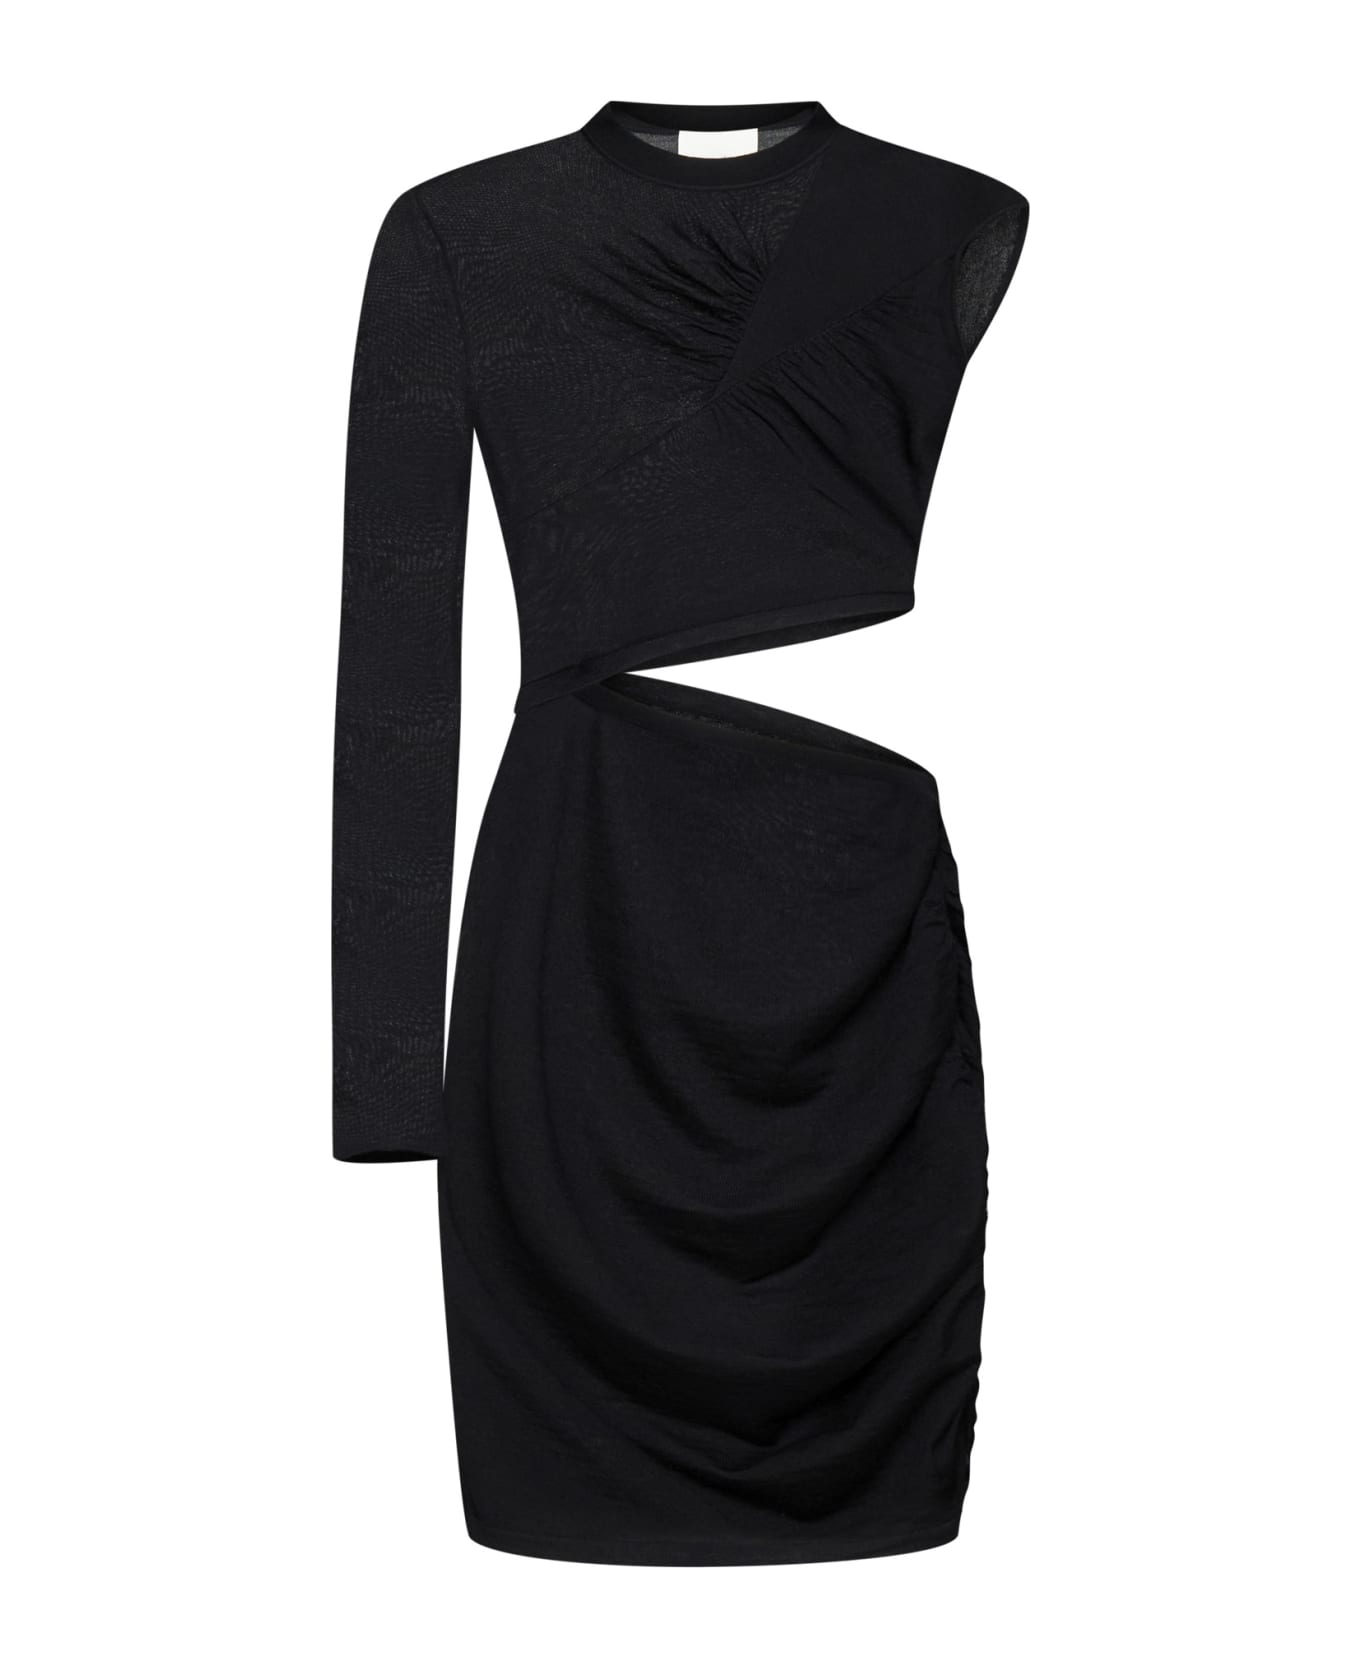 Isabel Marant Polly Cut-out Wool Dress - Black